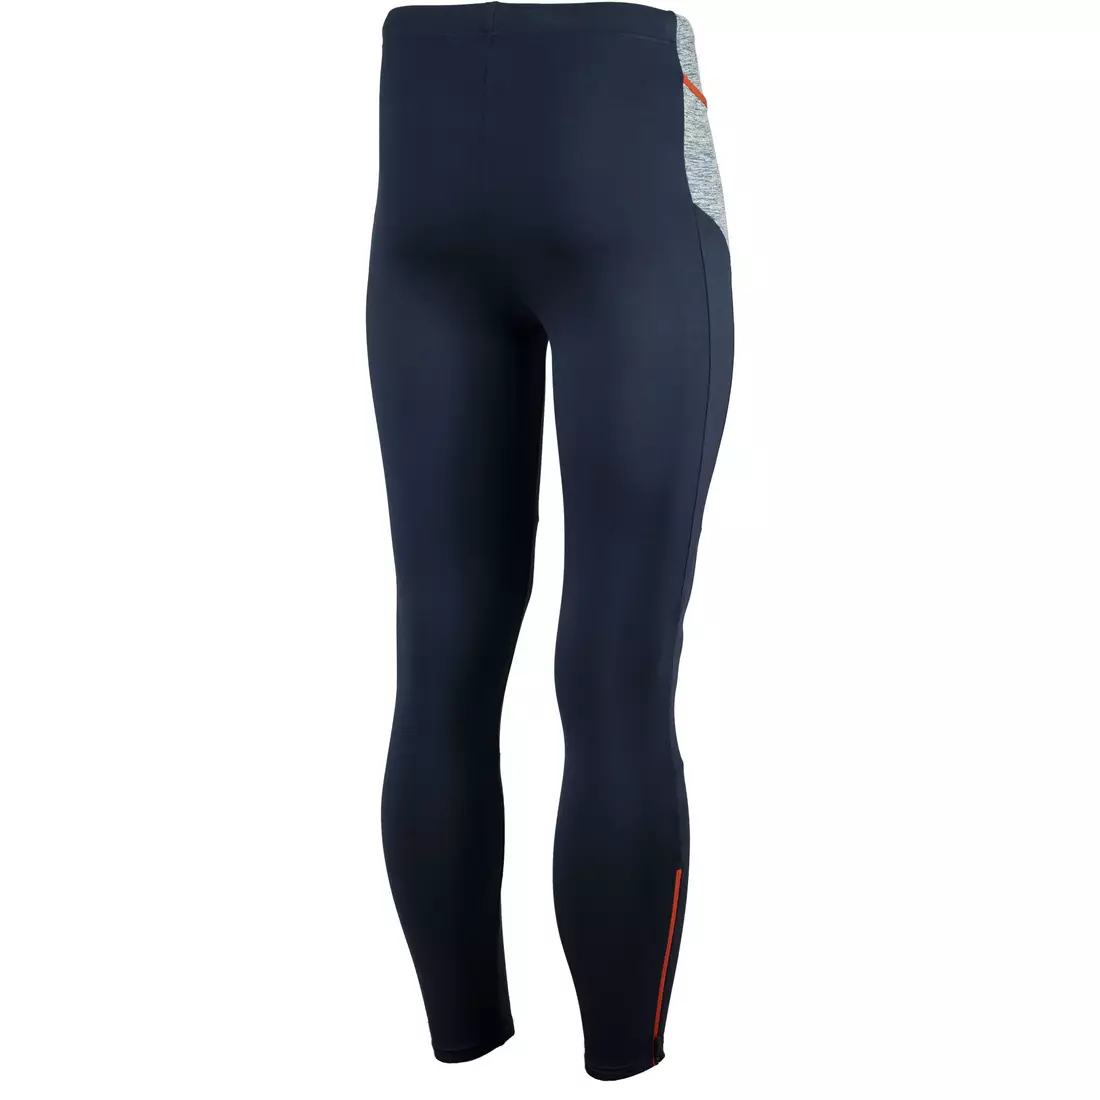 ROGELLI BROADWAY 830.741 men's insulated running trousers blue and red